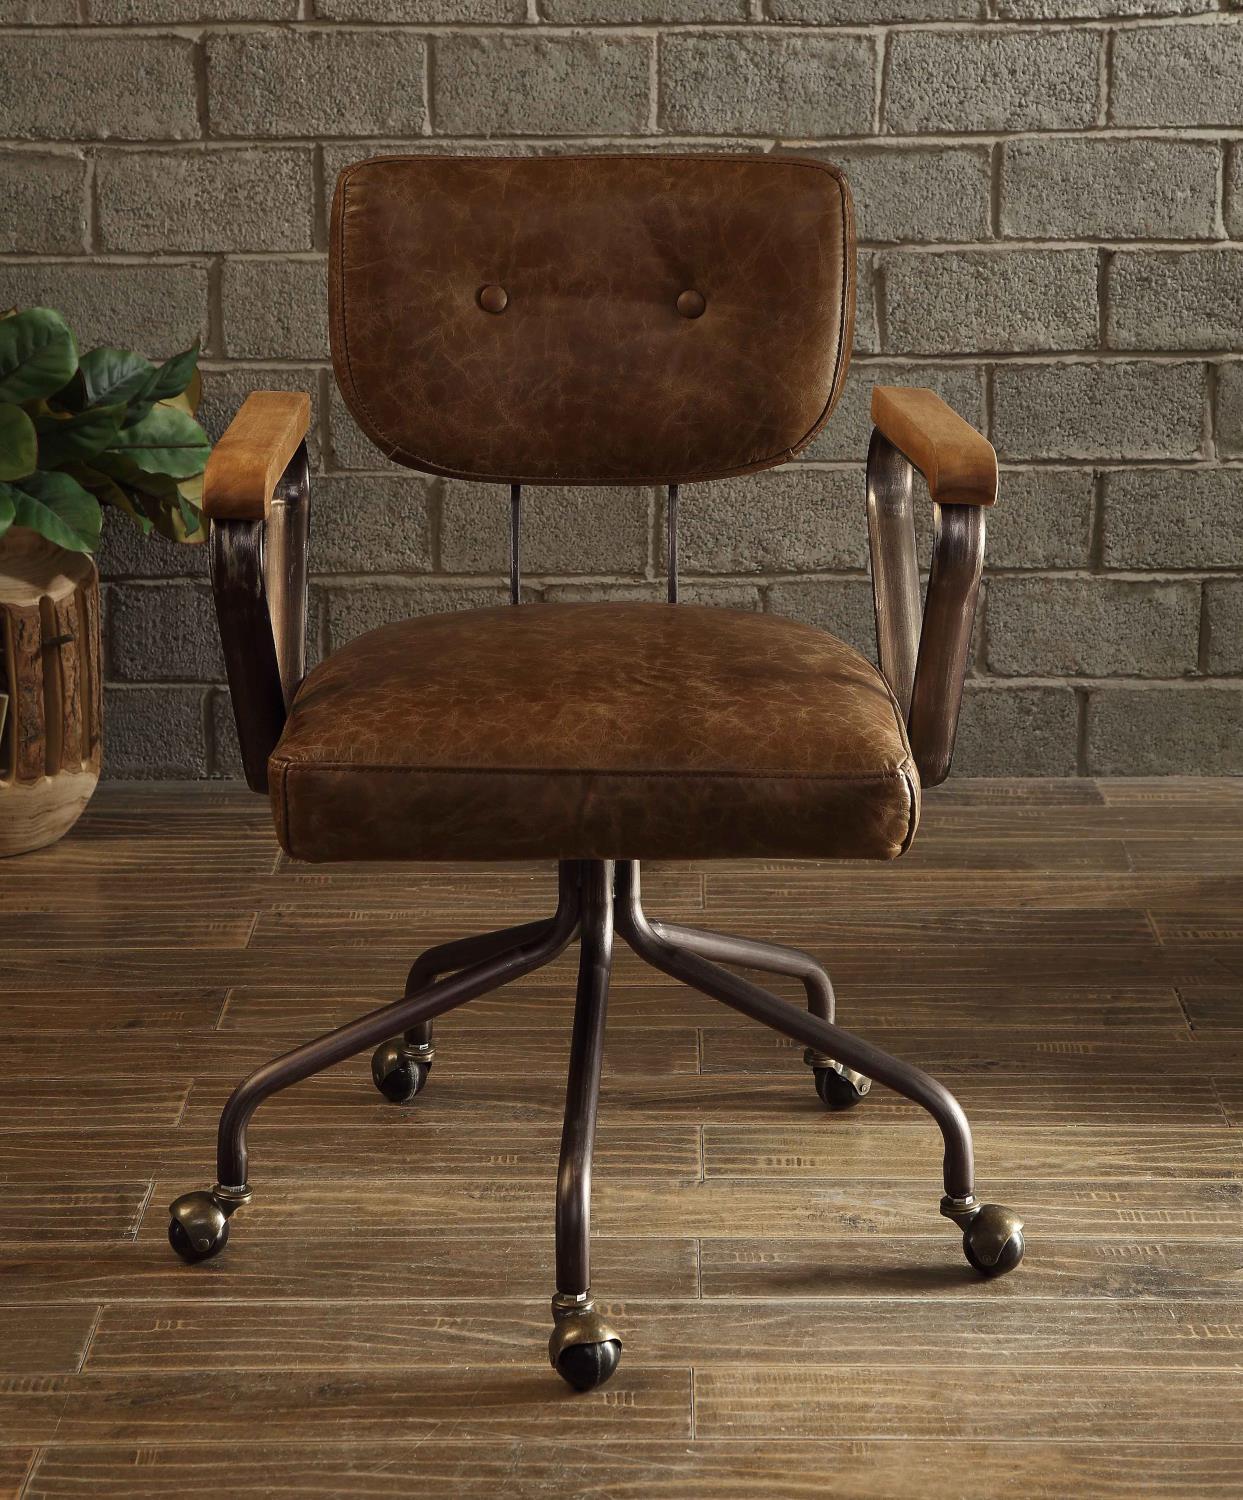 Buo Leather Executive Office Chair - Vintage Whiskey